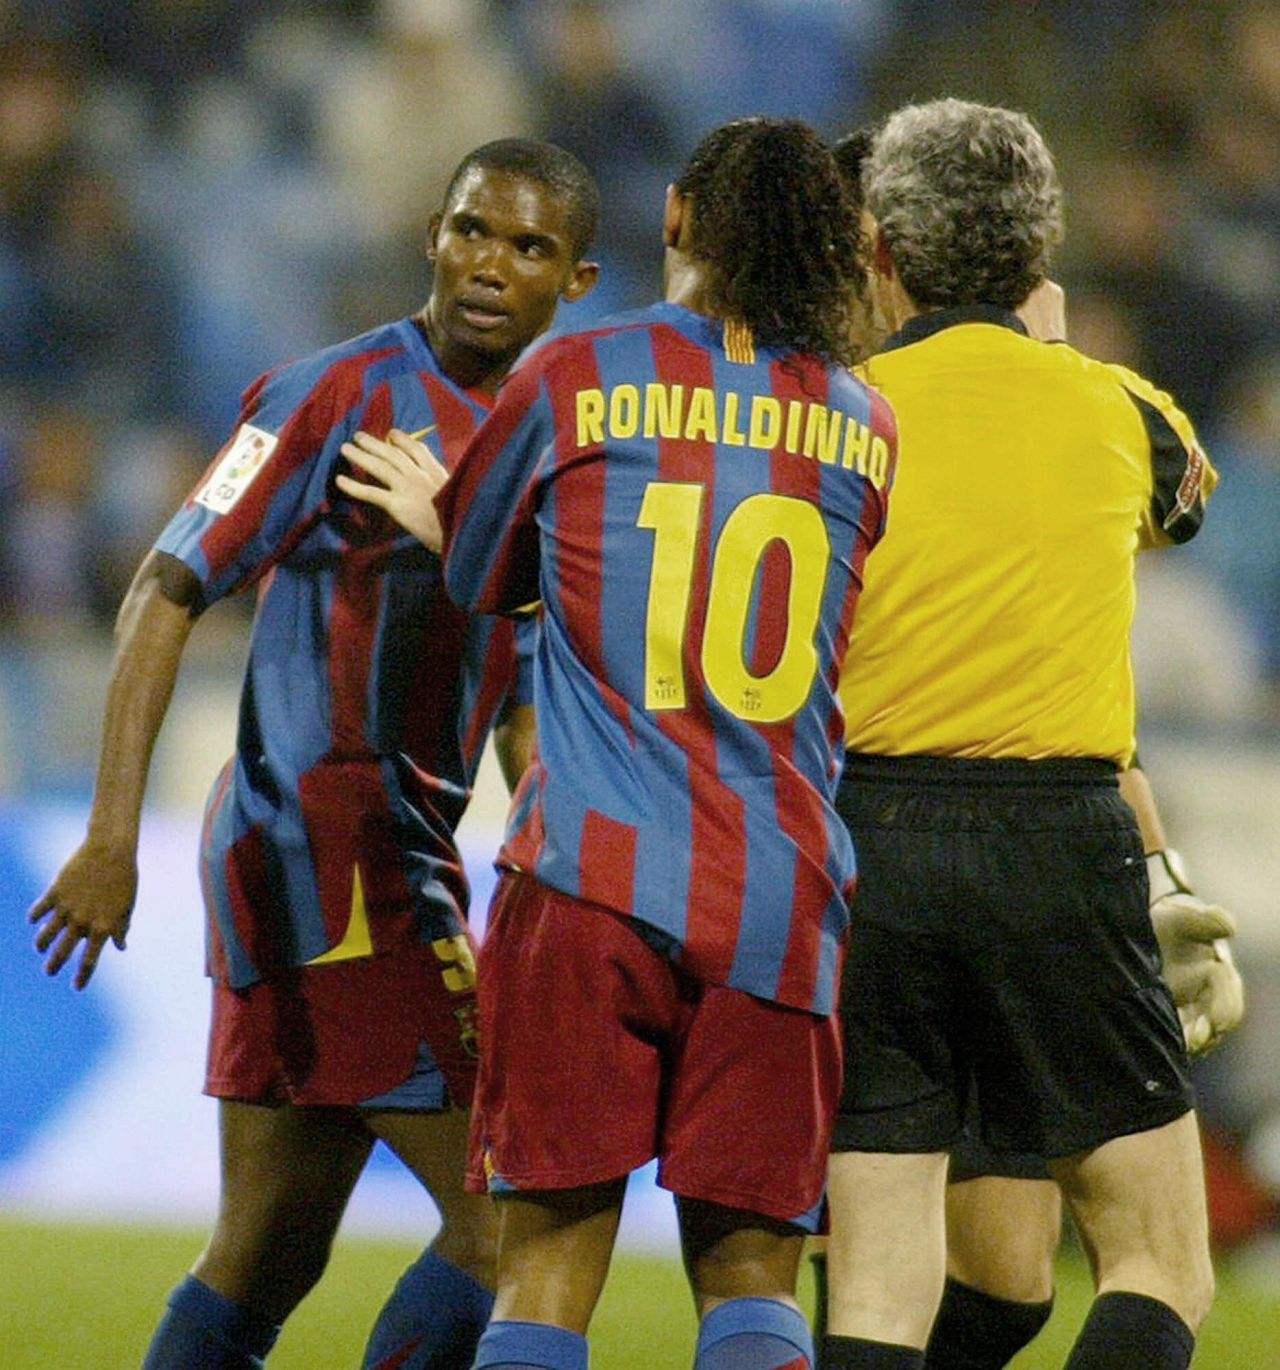 Samuel Eto'o, one of Africa's greatest players, tried to walk off the pitch in protest after being racially abused while playing for Barcelona against Real Zaragoza in Spain in 2006. His teammates and the referee persuaded him to stay on.